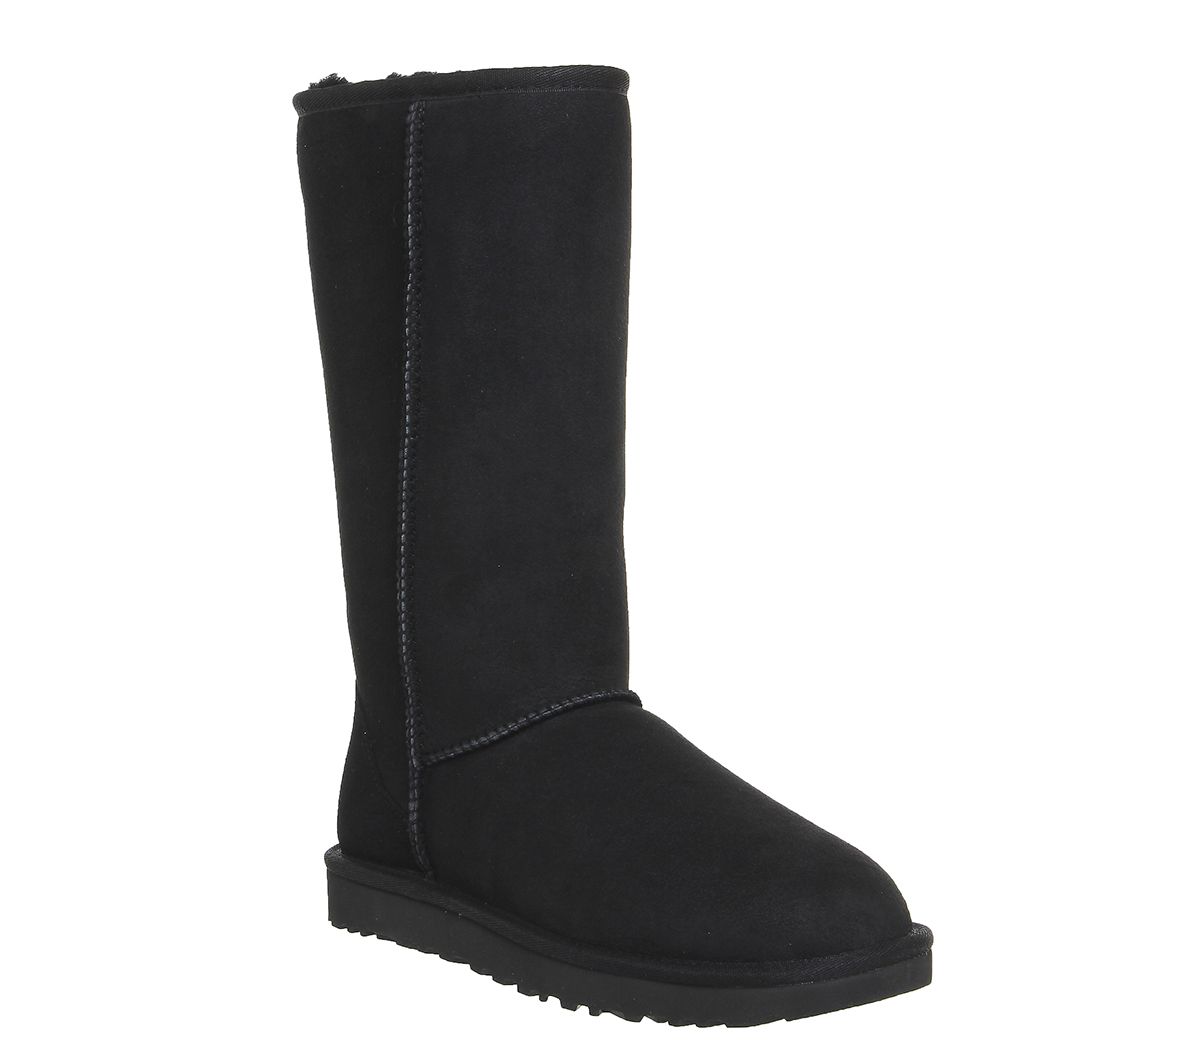 UGG Classic Tall II Boots Black Suede - Knee High Boots